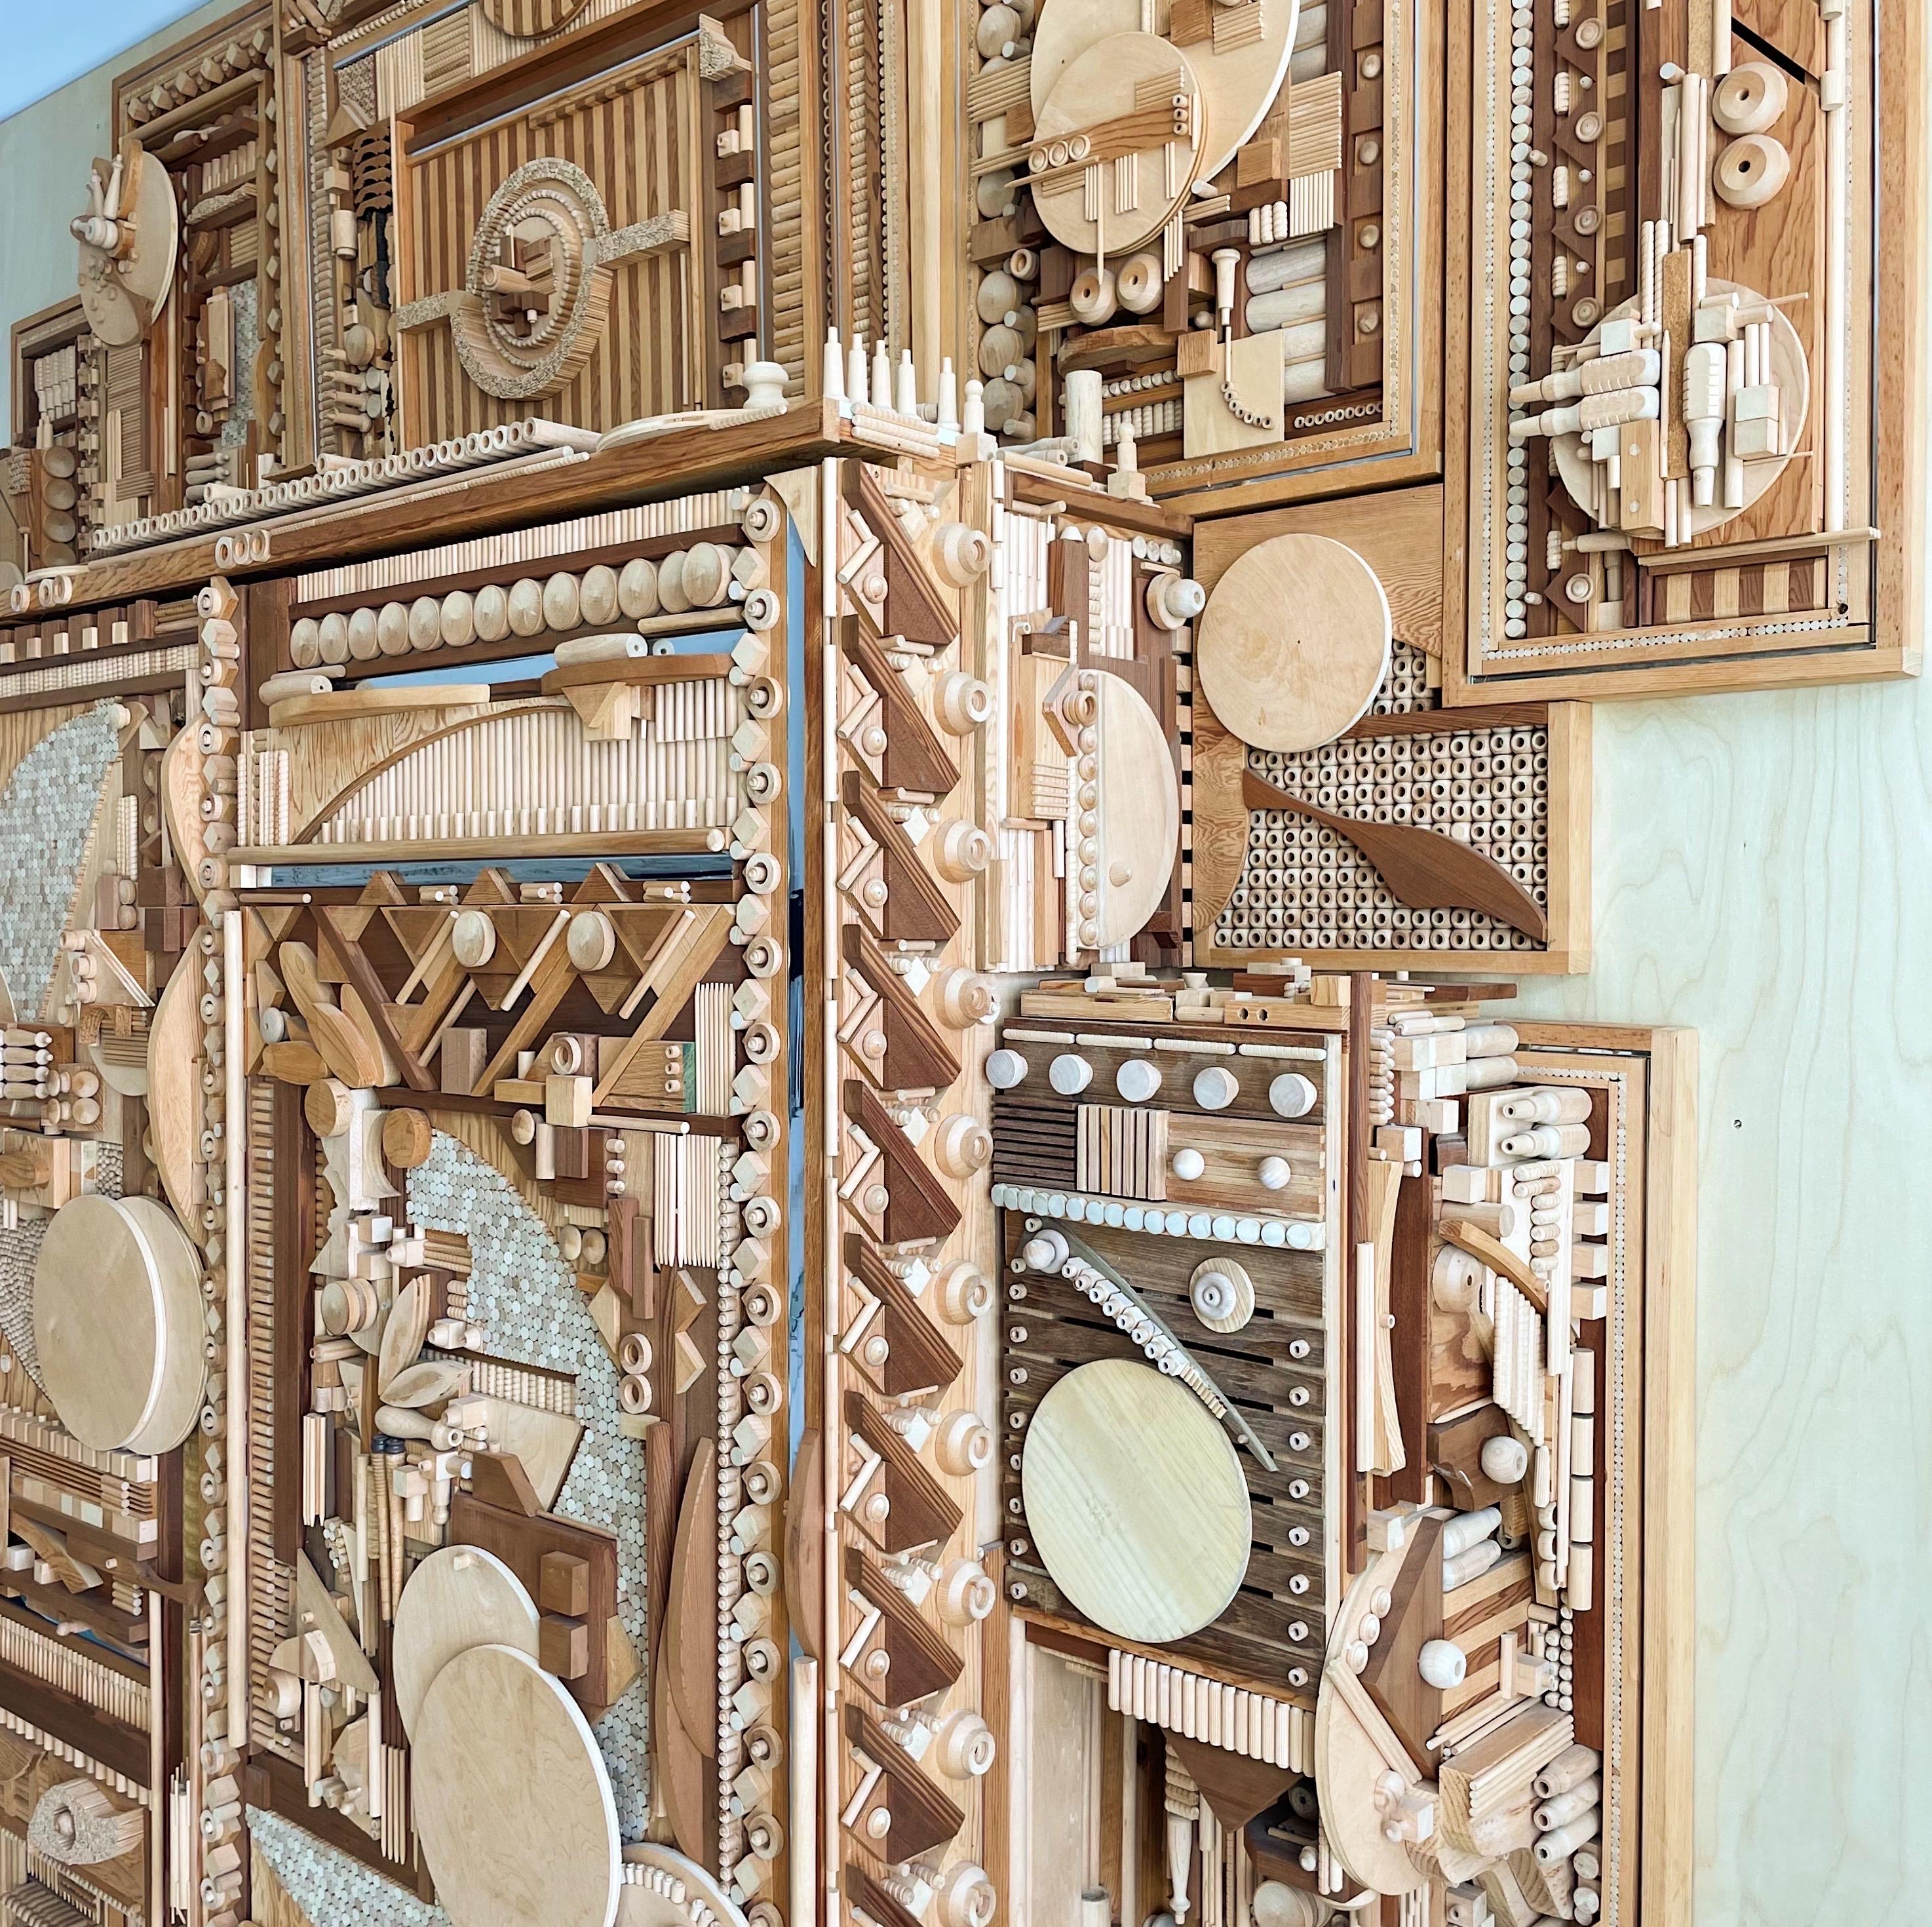 One of a kind monumental cabinet, purchased directly from the client Mr Salleroli (1933-) custom made it for. Made from thousands of pieces of wood found objects and dowels, some antique and vintage at the time of construction. The two center doors